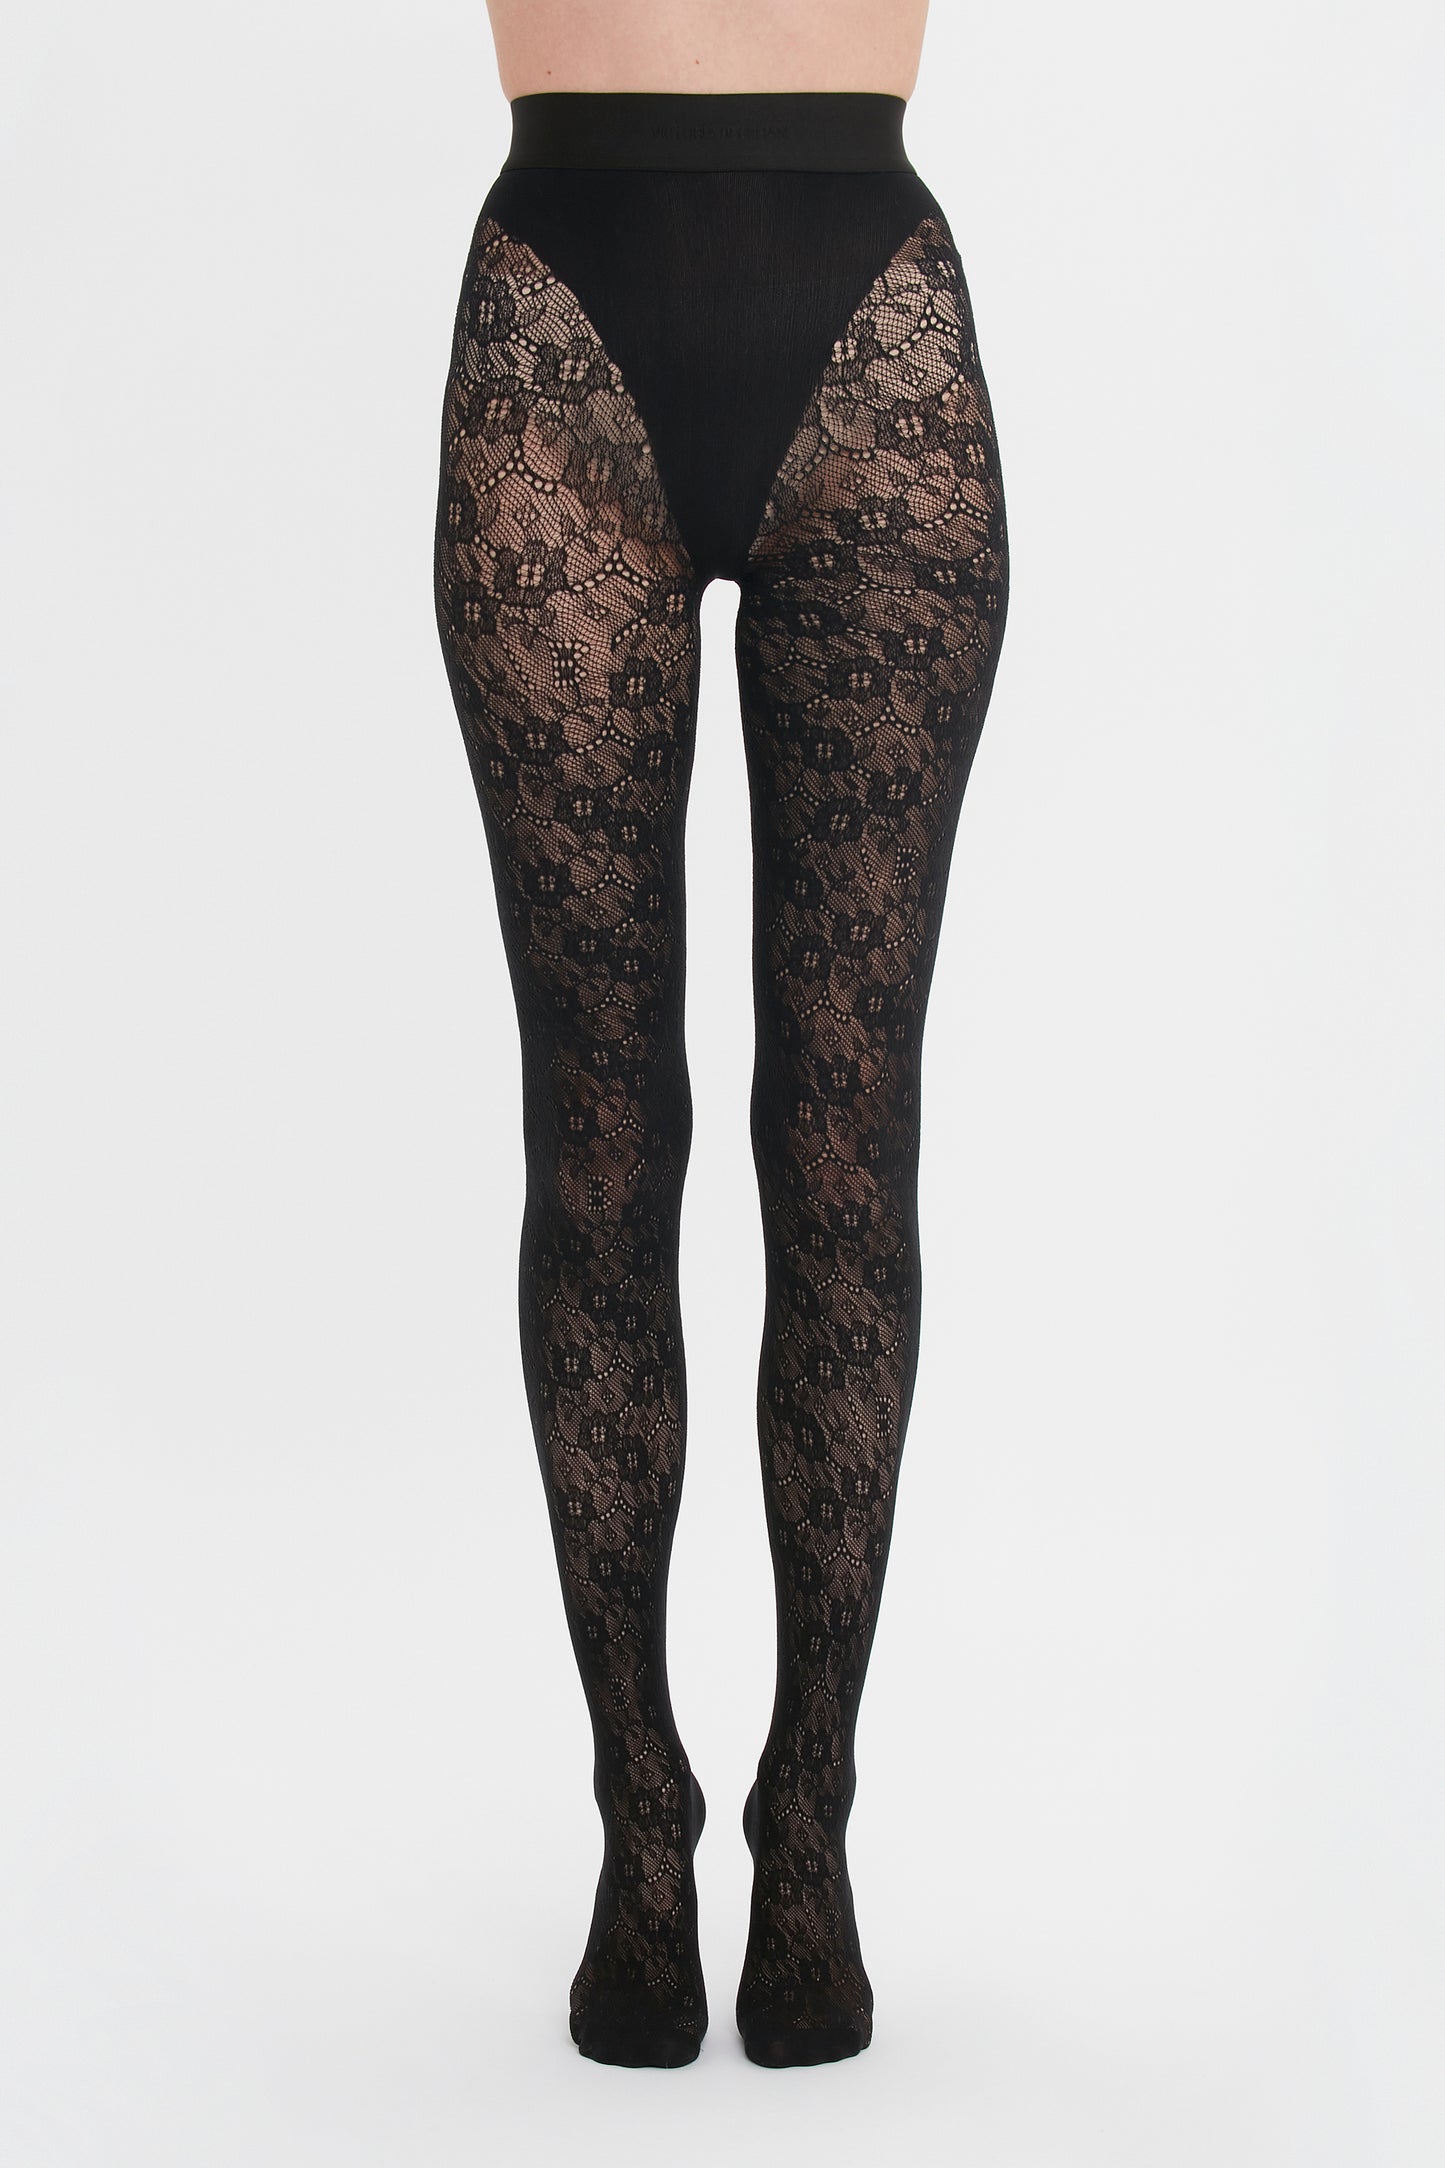 Black Lace Tights 